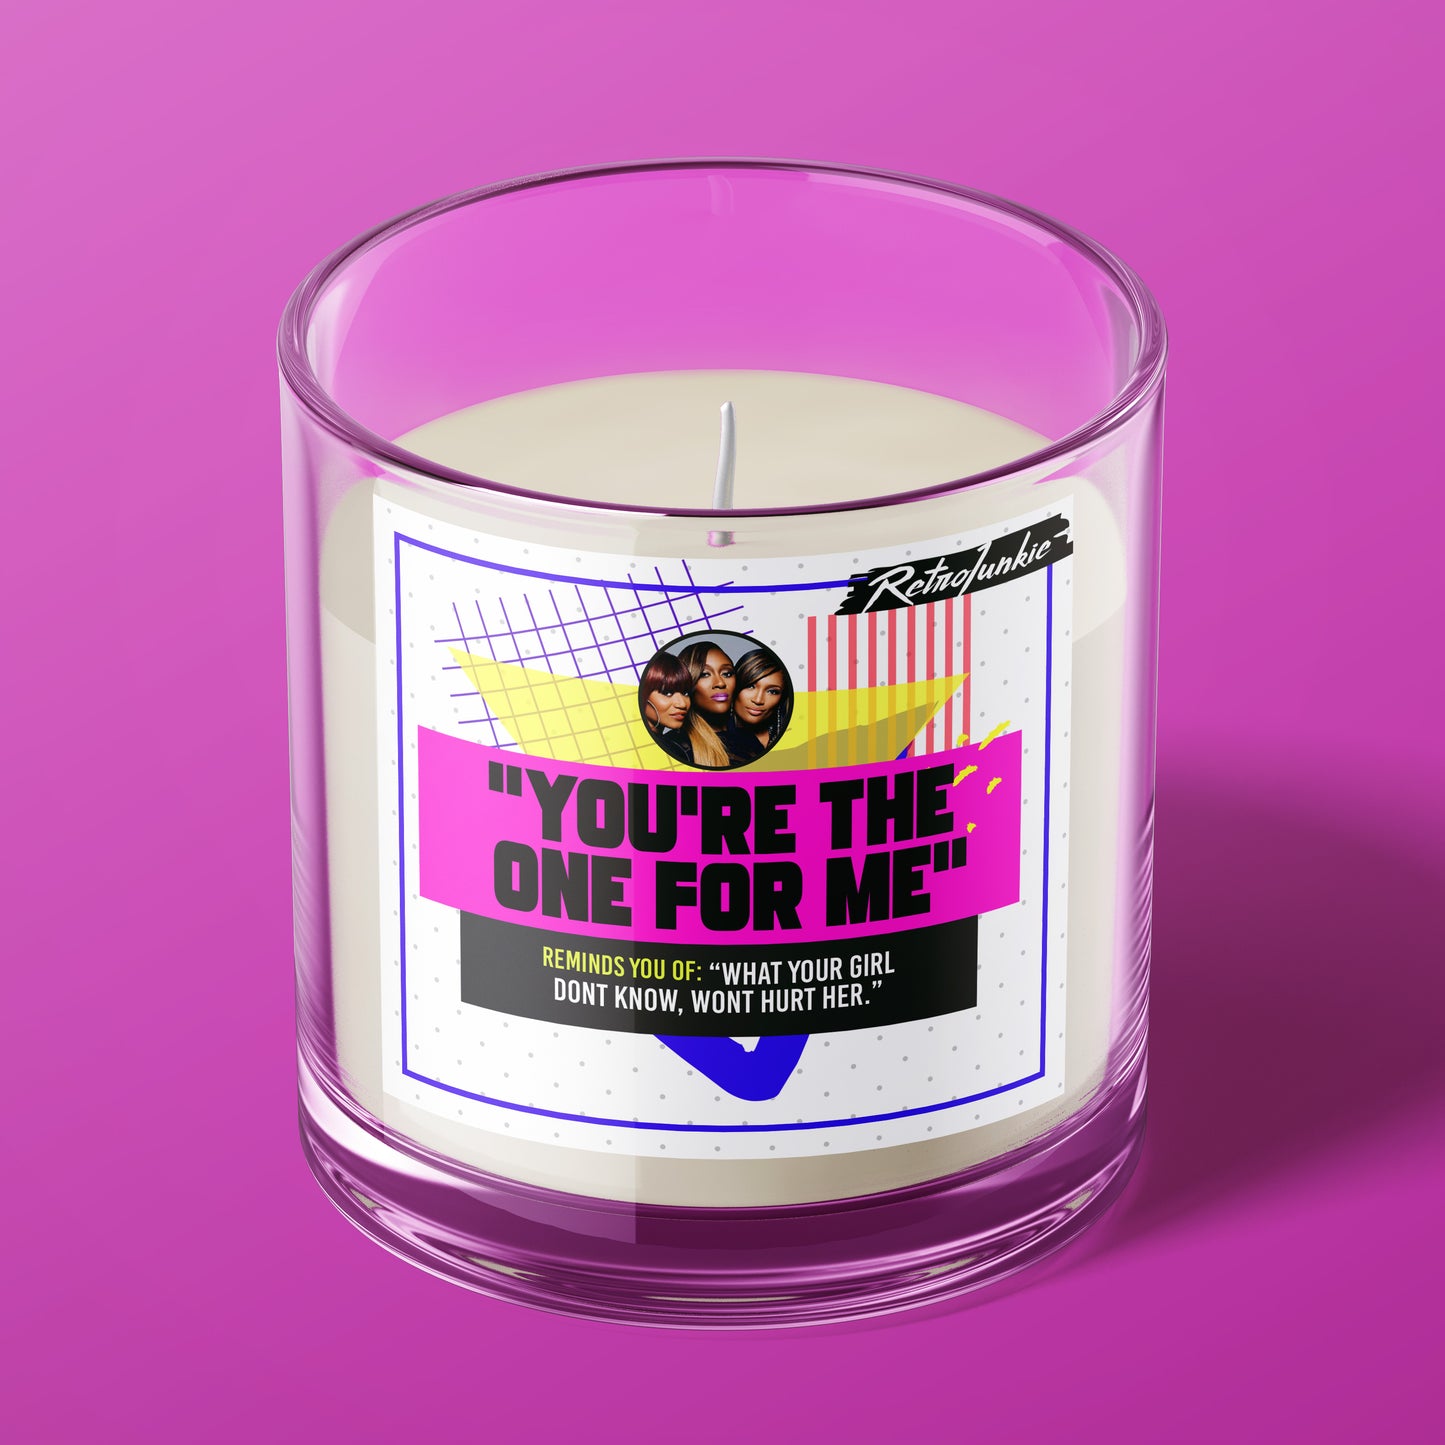 Retro Junkie's "90's Inspired Candles"